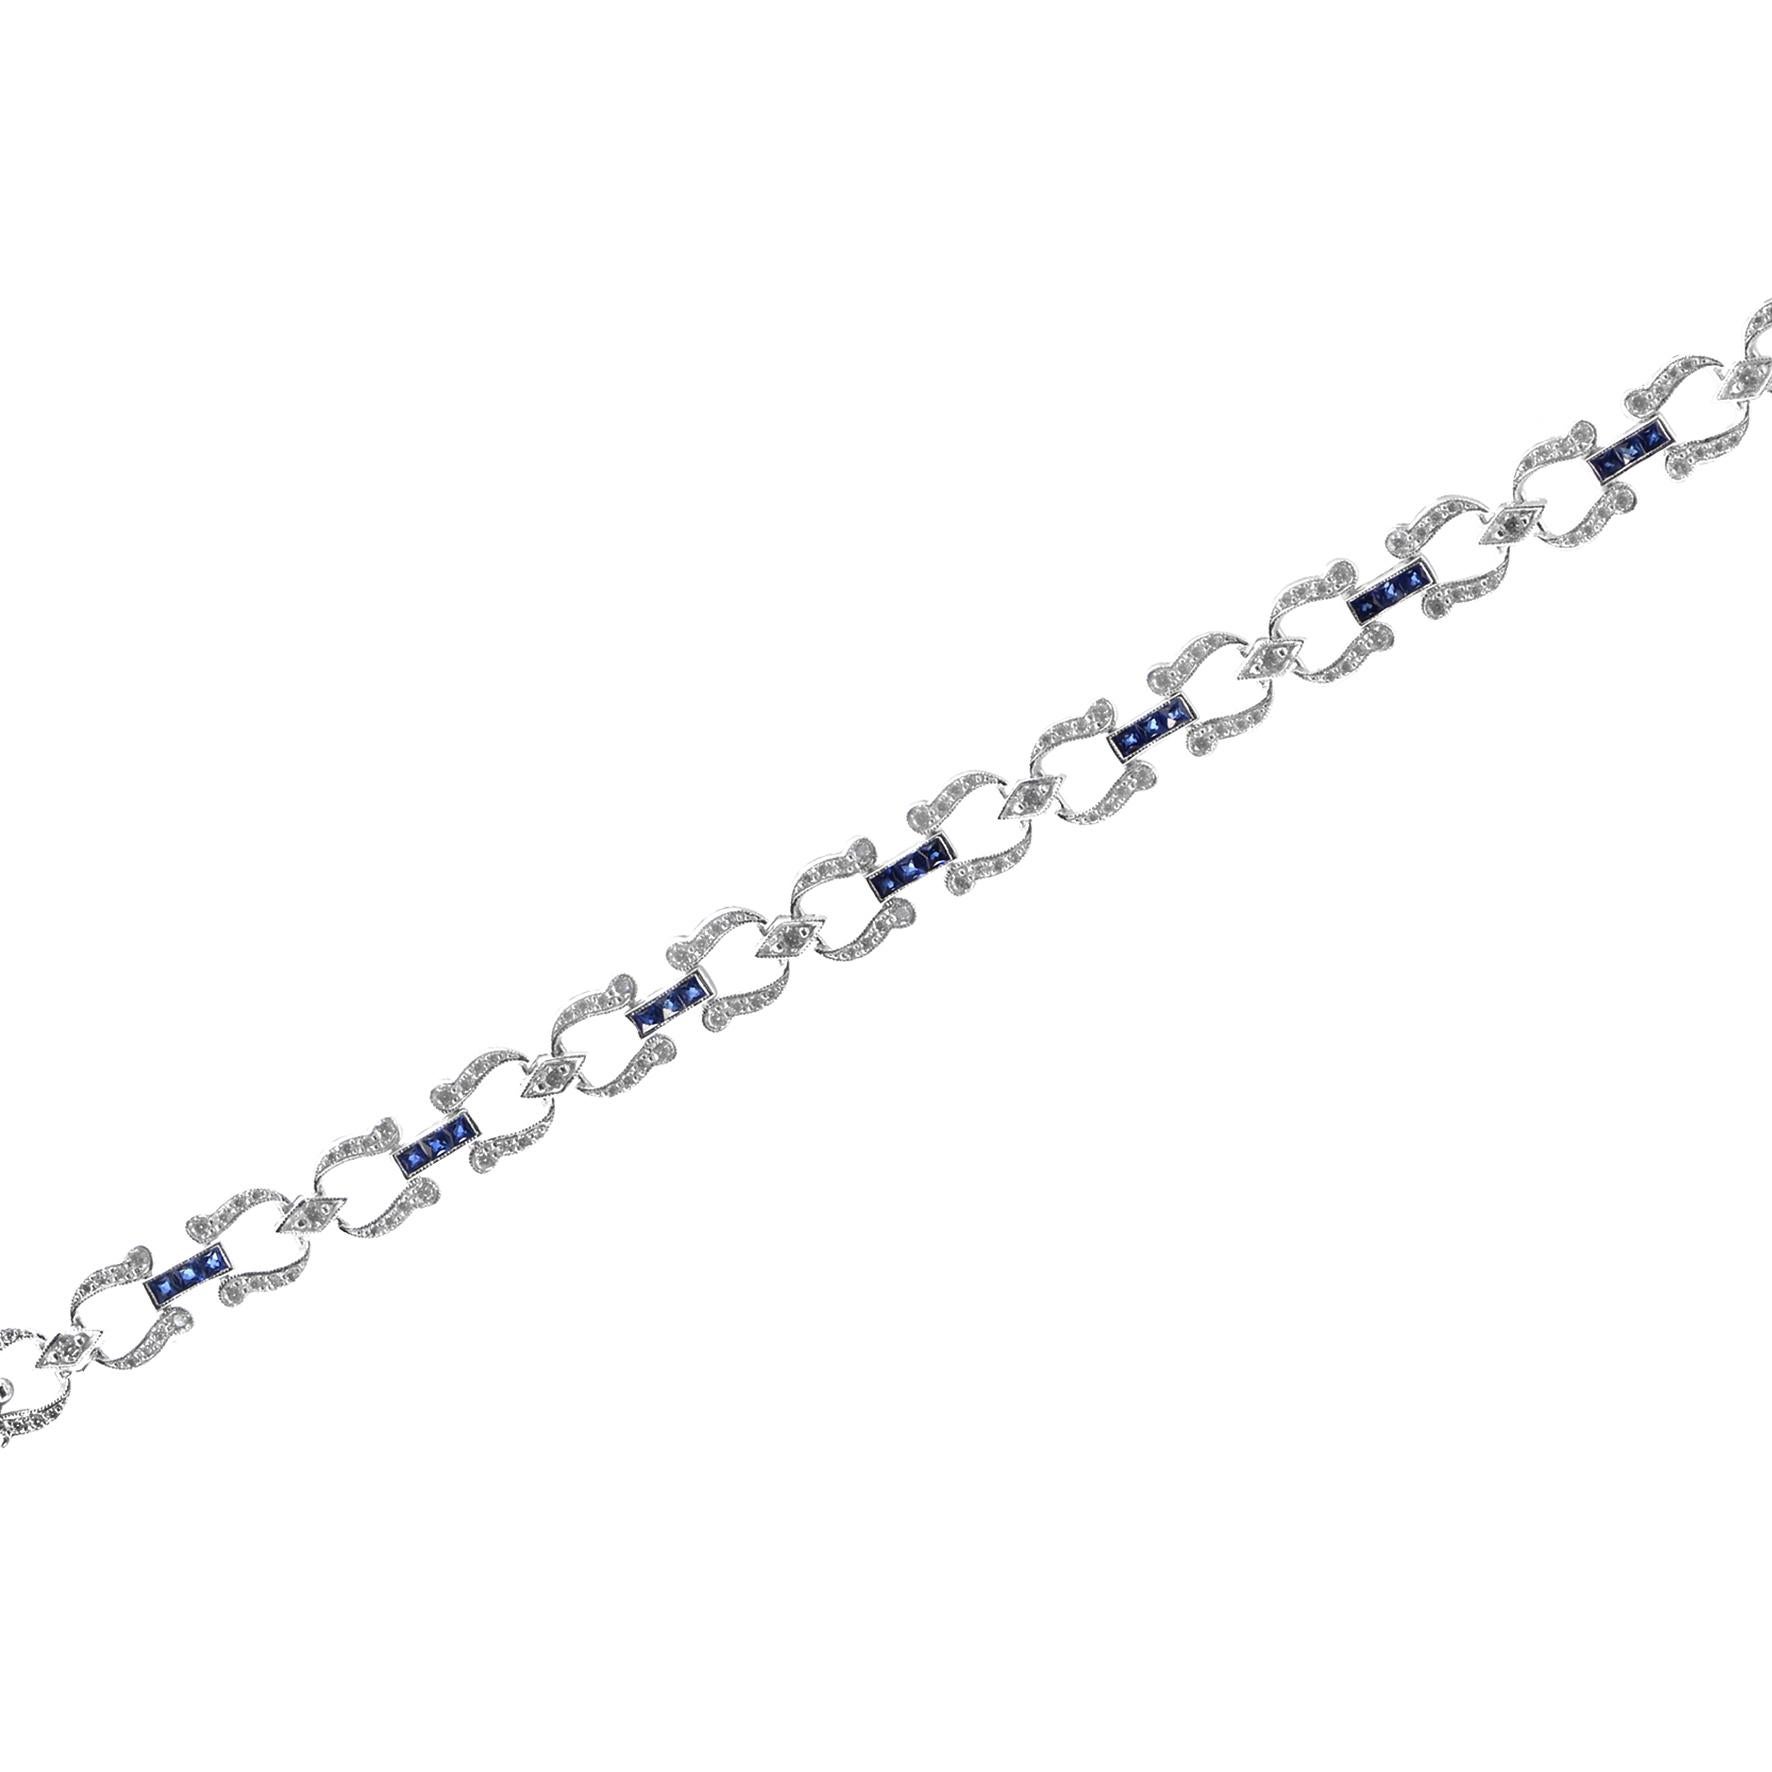 Handcrafted out of stunning French-cut blue sapphires and diamonds, this bracelet is perfect for evening or day wear. Each individual section features round diamonds and is separated from its neighbor with a sapphire line. This wonderful piece is a